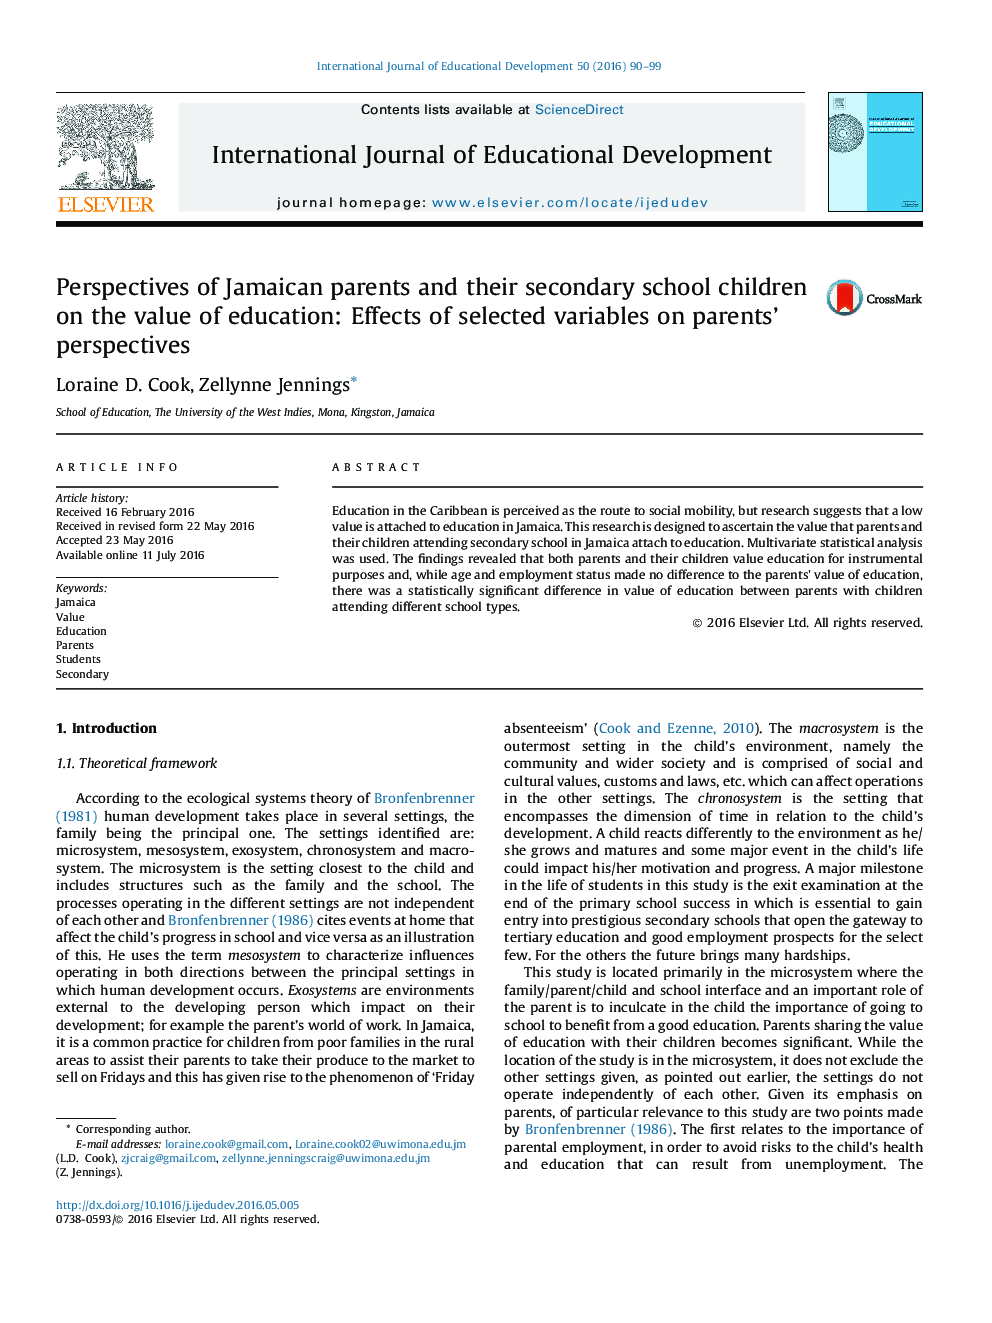 Perspectives of Jamaican parents and their secondary school children on the value of education: Effects of selected variables on parents' perspectives